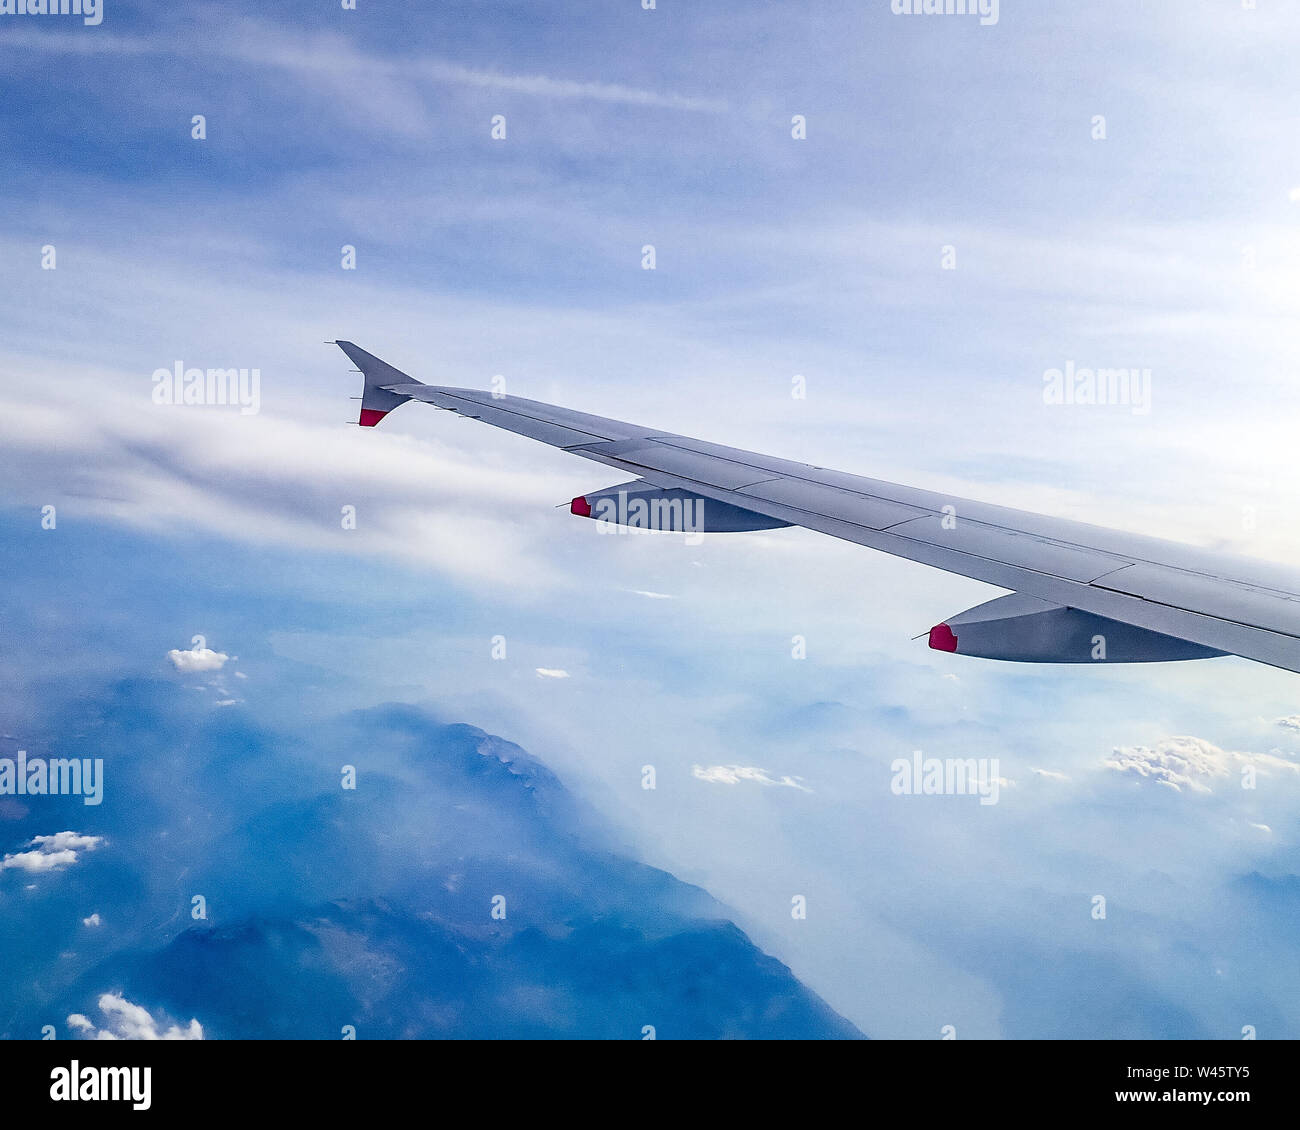 Venice, 16 July 2019. British Airways Airbus 319 in flight over Italy.  Photo by Enrique Shore/Alamy Stock Photo Stock Photo